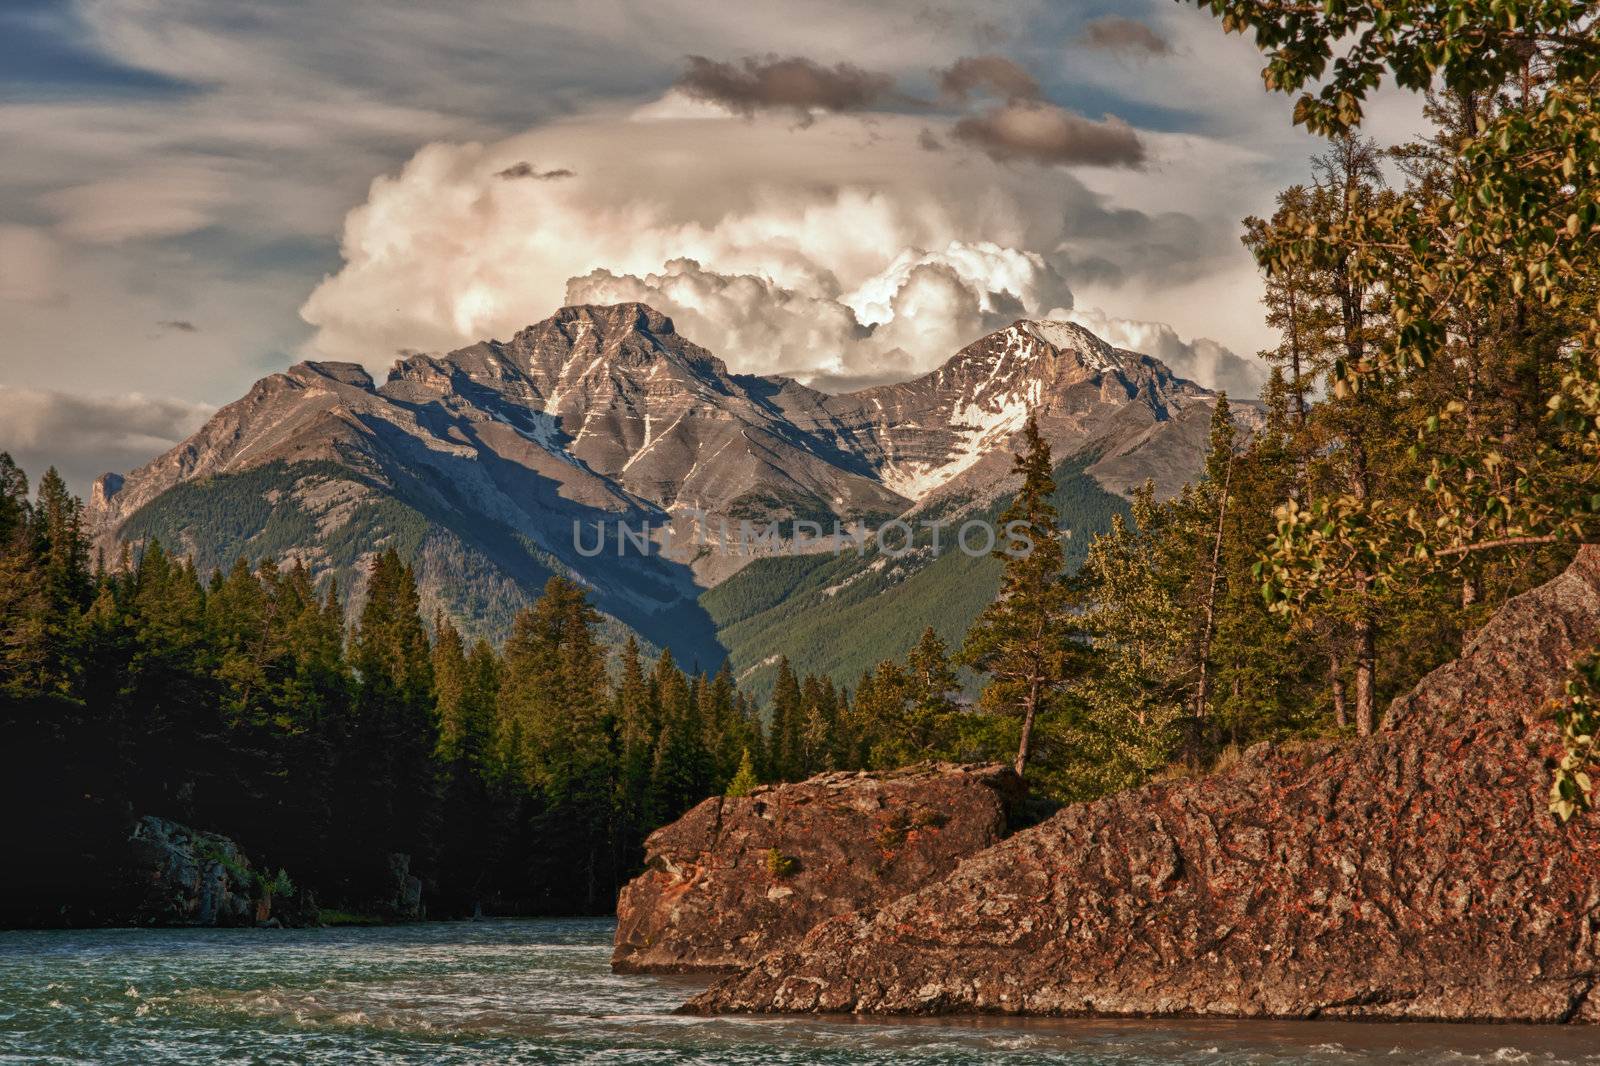 A storm gathers over the mountains at sunset in Banff - Canada. by Claudine